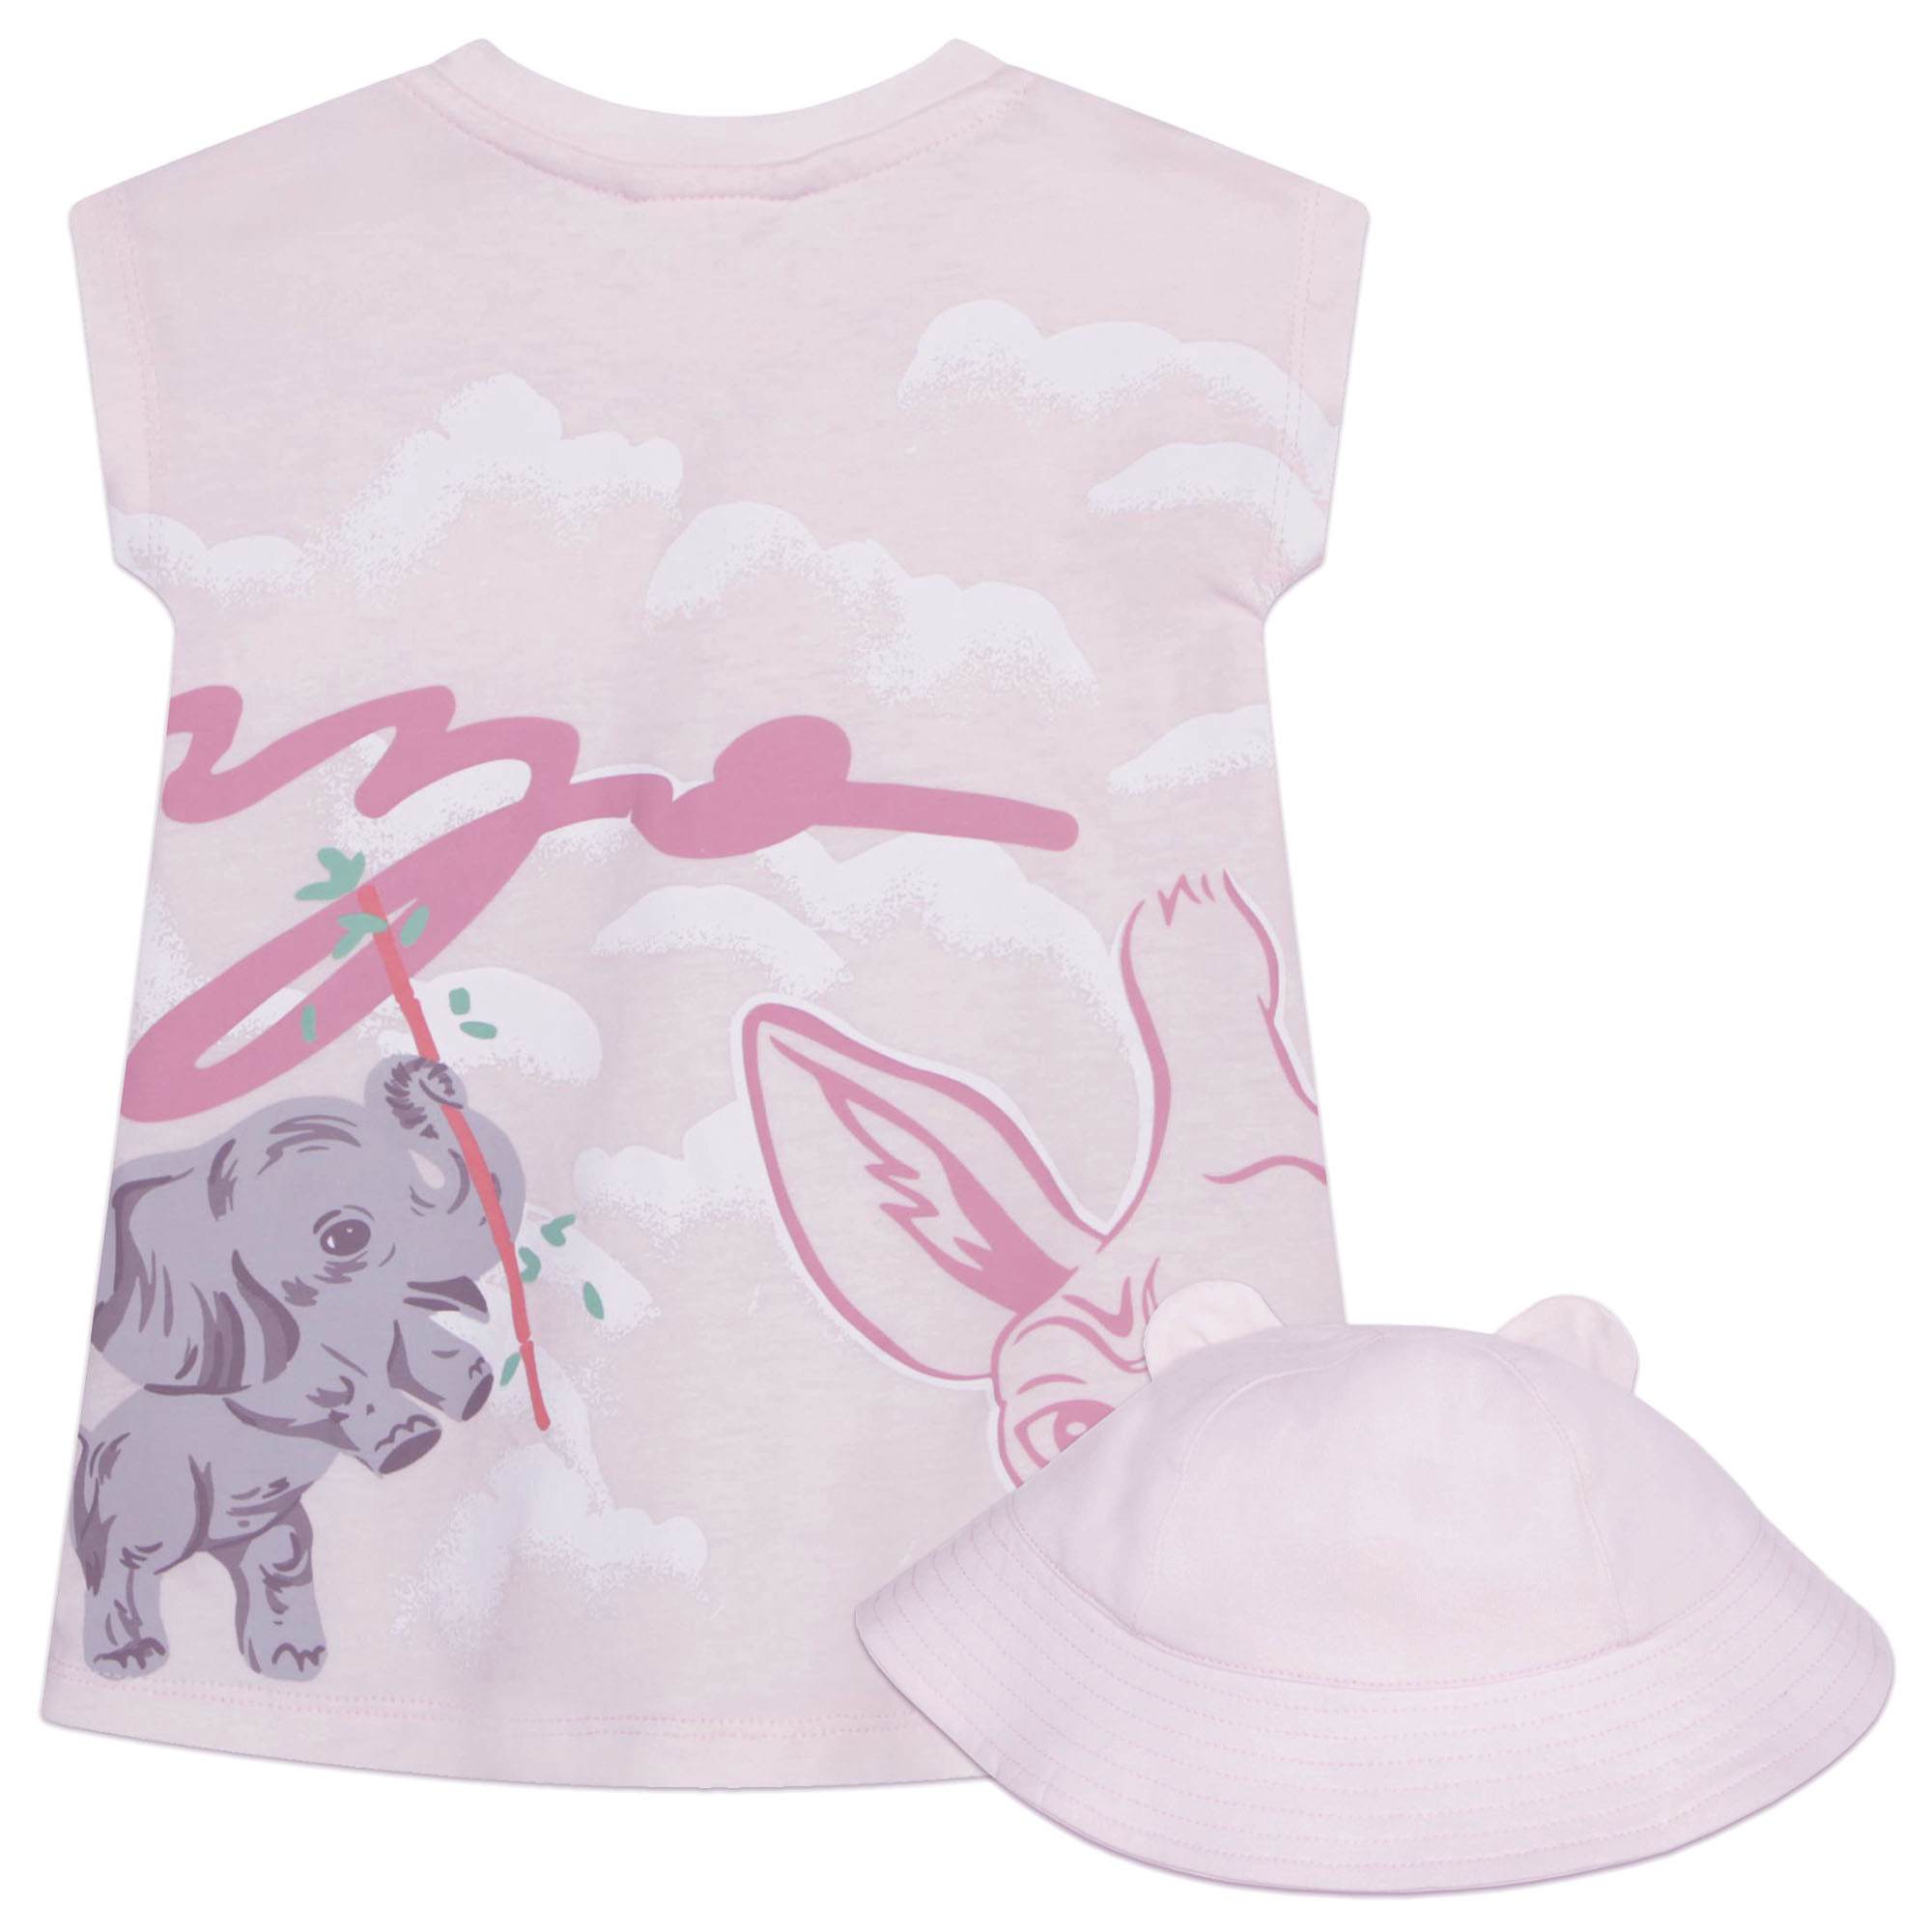 Cotton bucket hat and dress KENZO KIDS for GIRL